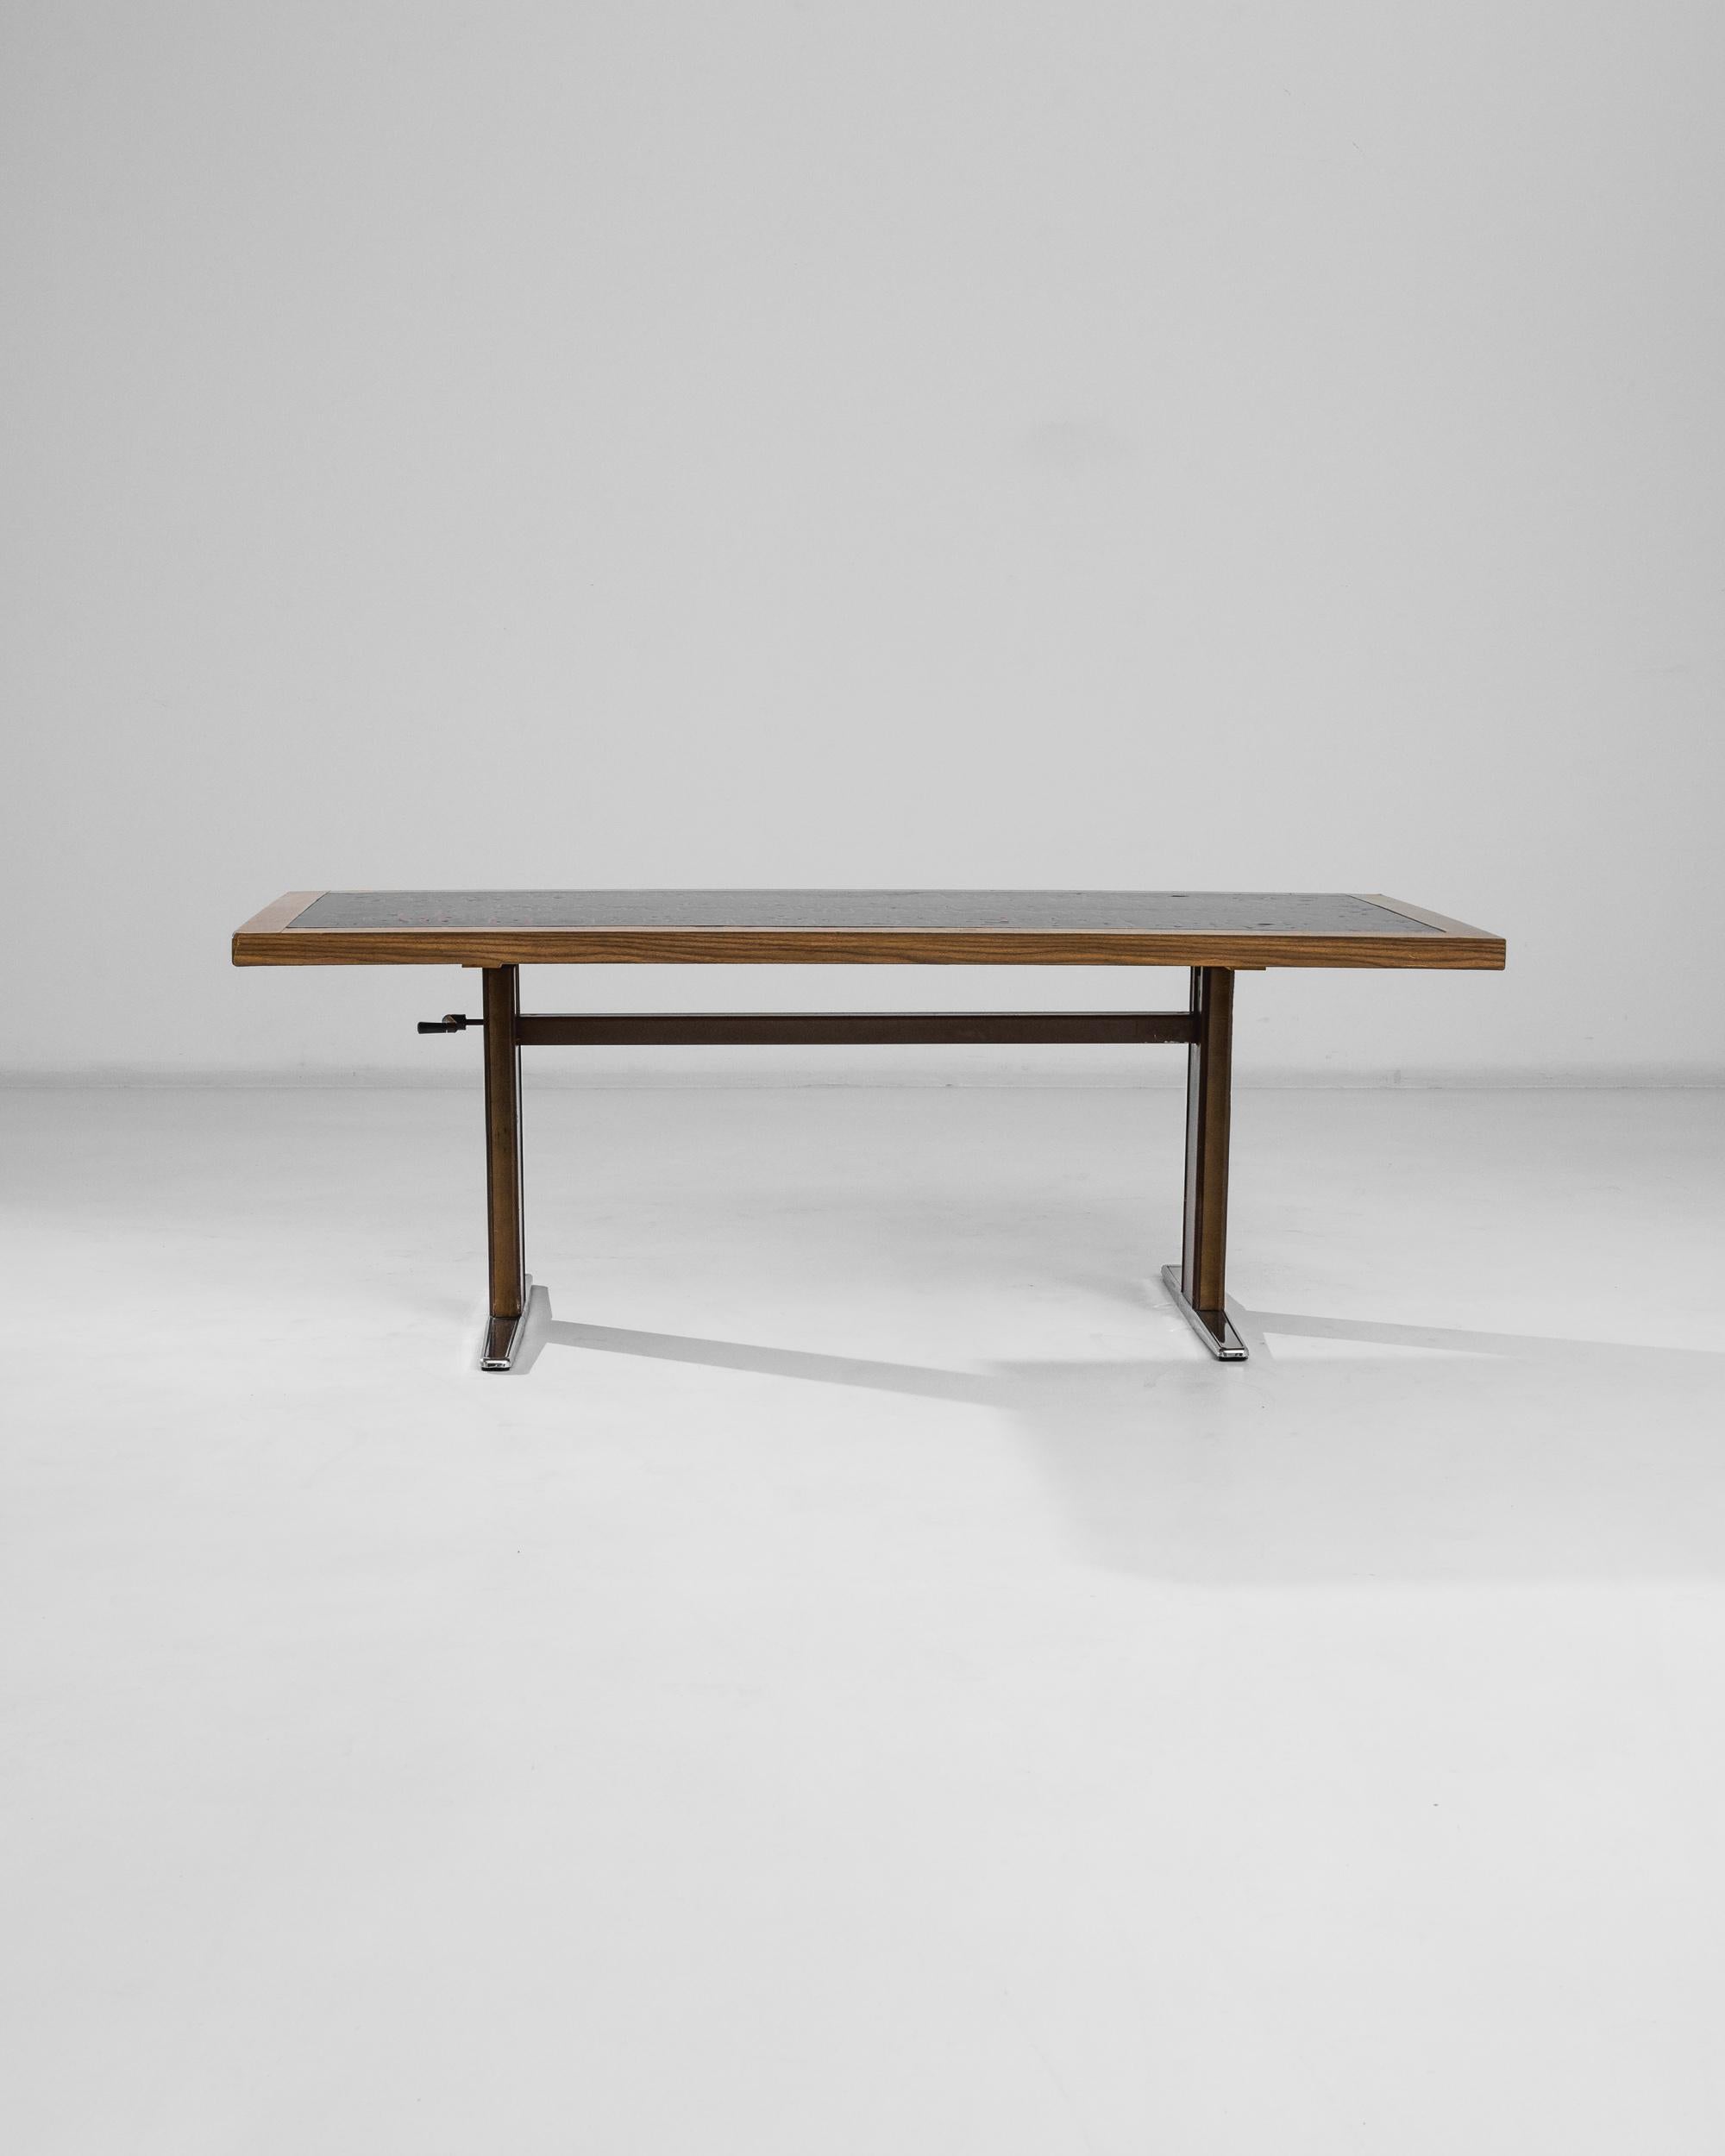 This 20th Century Scandinavian Metal Coffee Table seamlessly blends the natural warmth of a wooden top with the sleek, industrial feel of a metal base. The tabletop showcases a rich, wood grain texture, bordered by a unique inset that features a